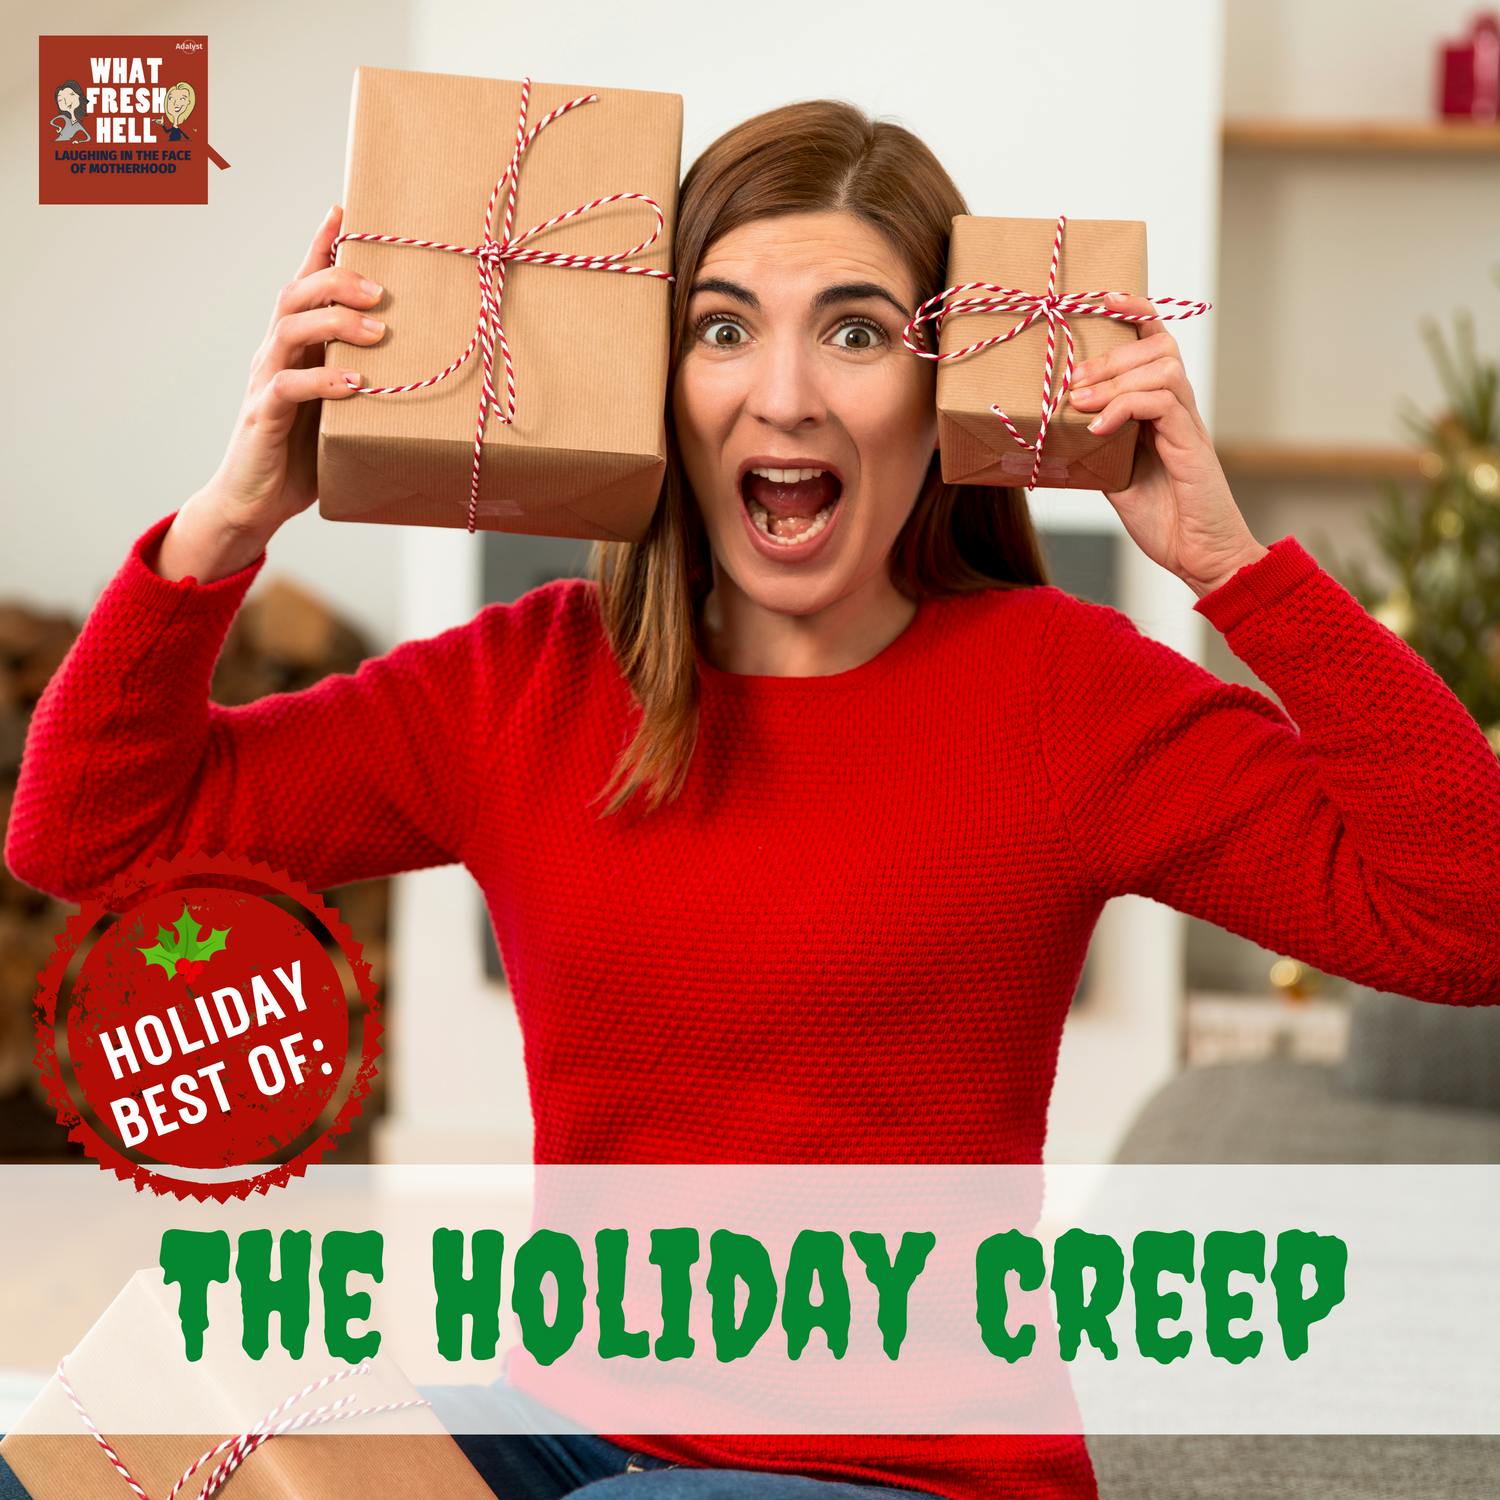 HOLIDAY BEST OF: The Holiday Creep